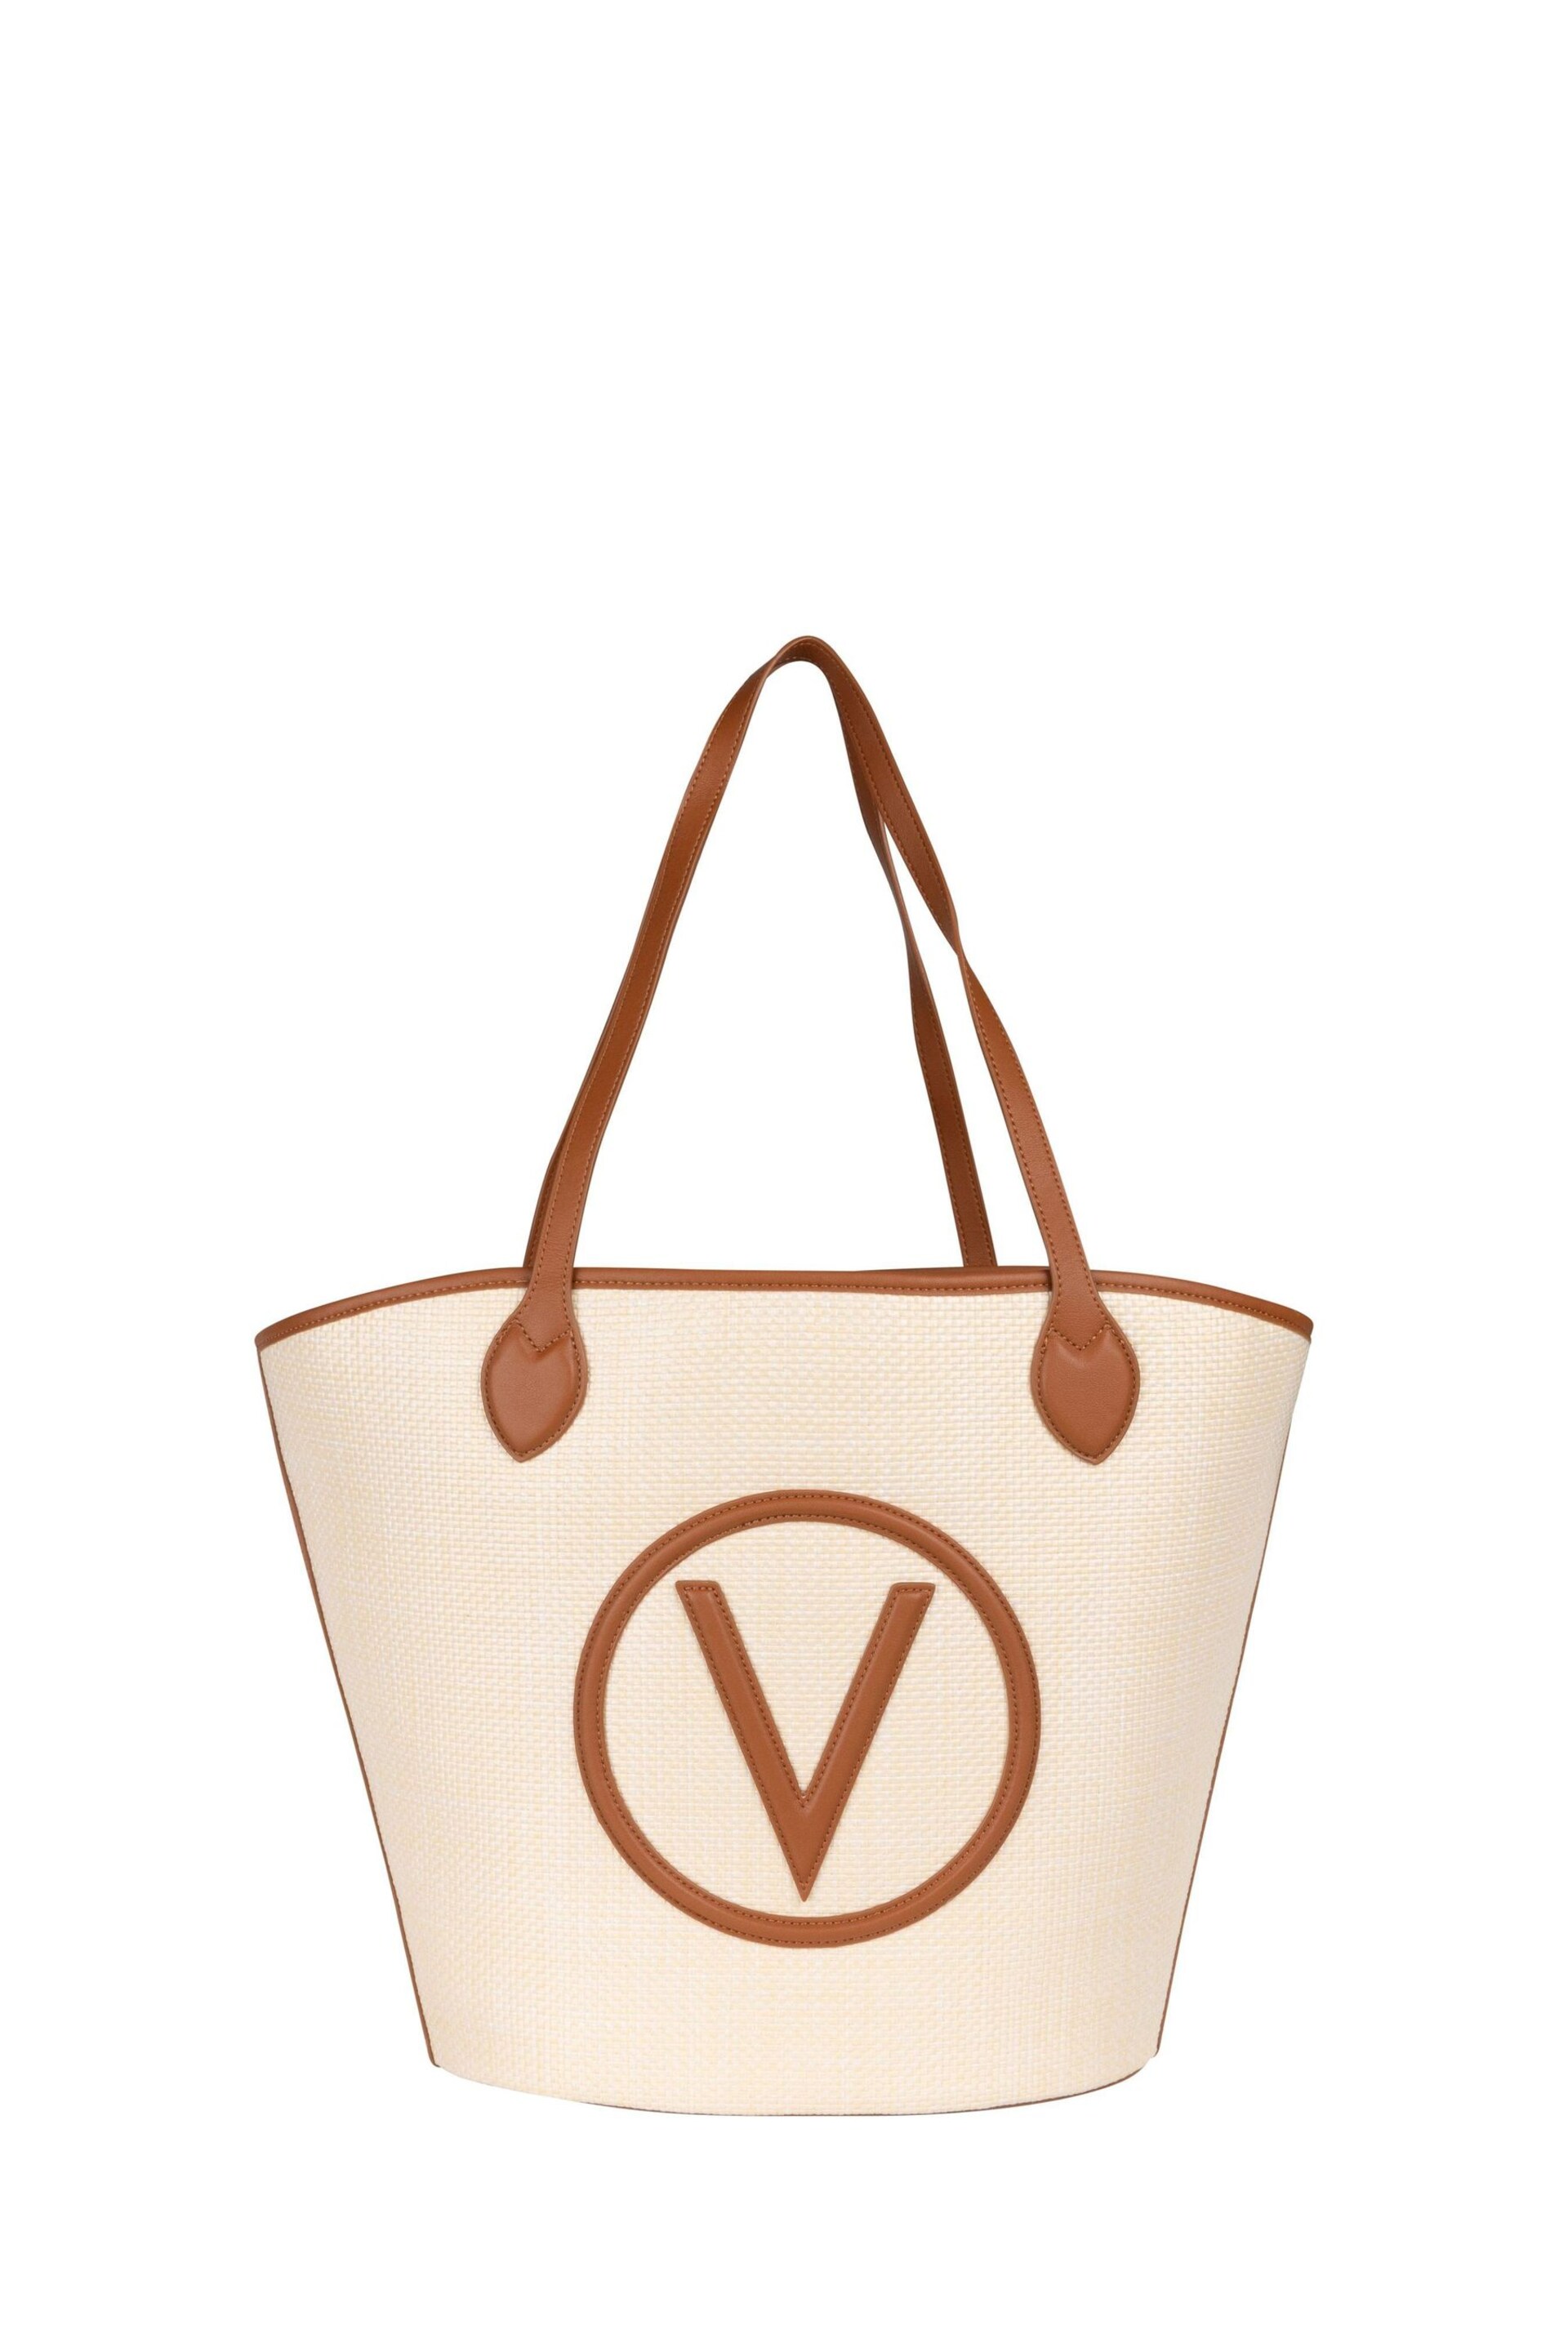 Valentino Bags Brown Covent Canvas Tote Bag With Removable Crossbody Bag - Image 1 of 5